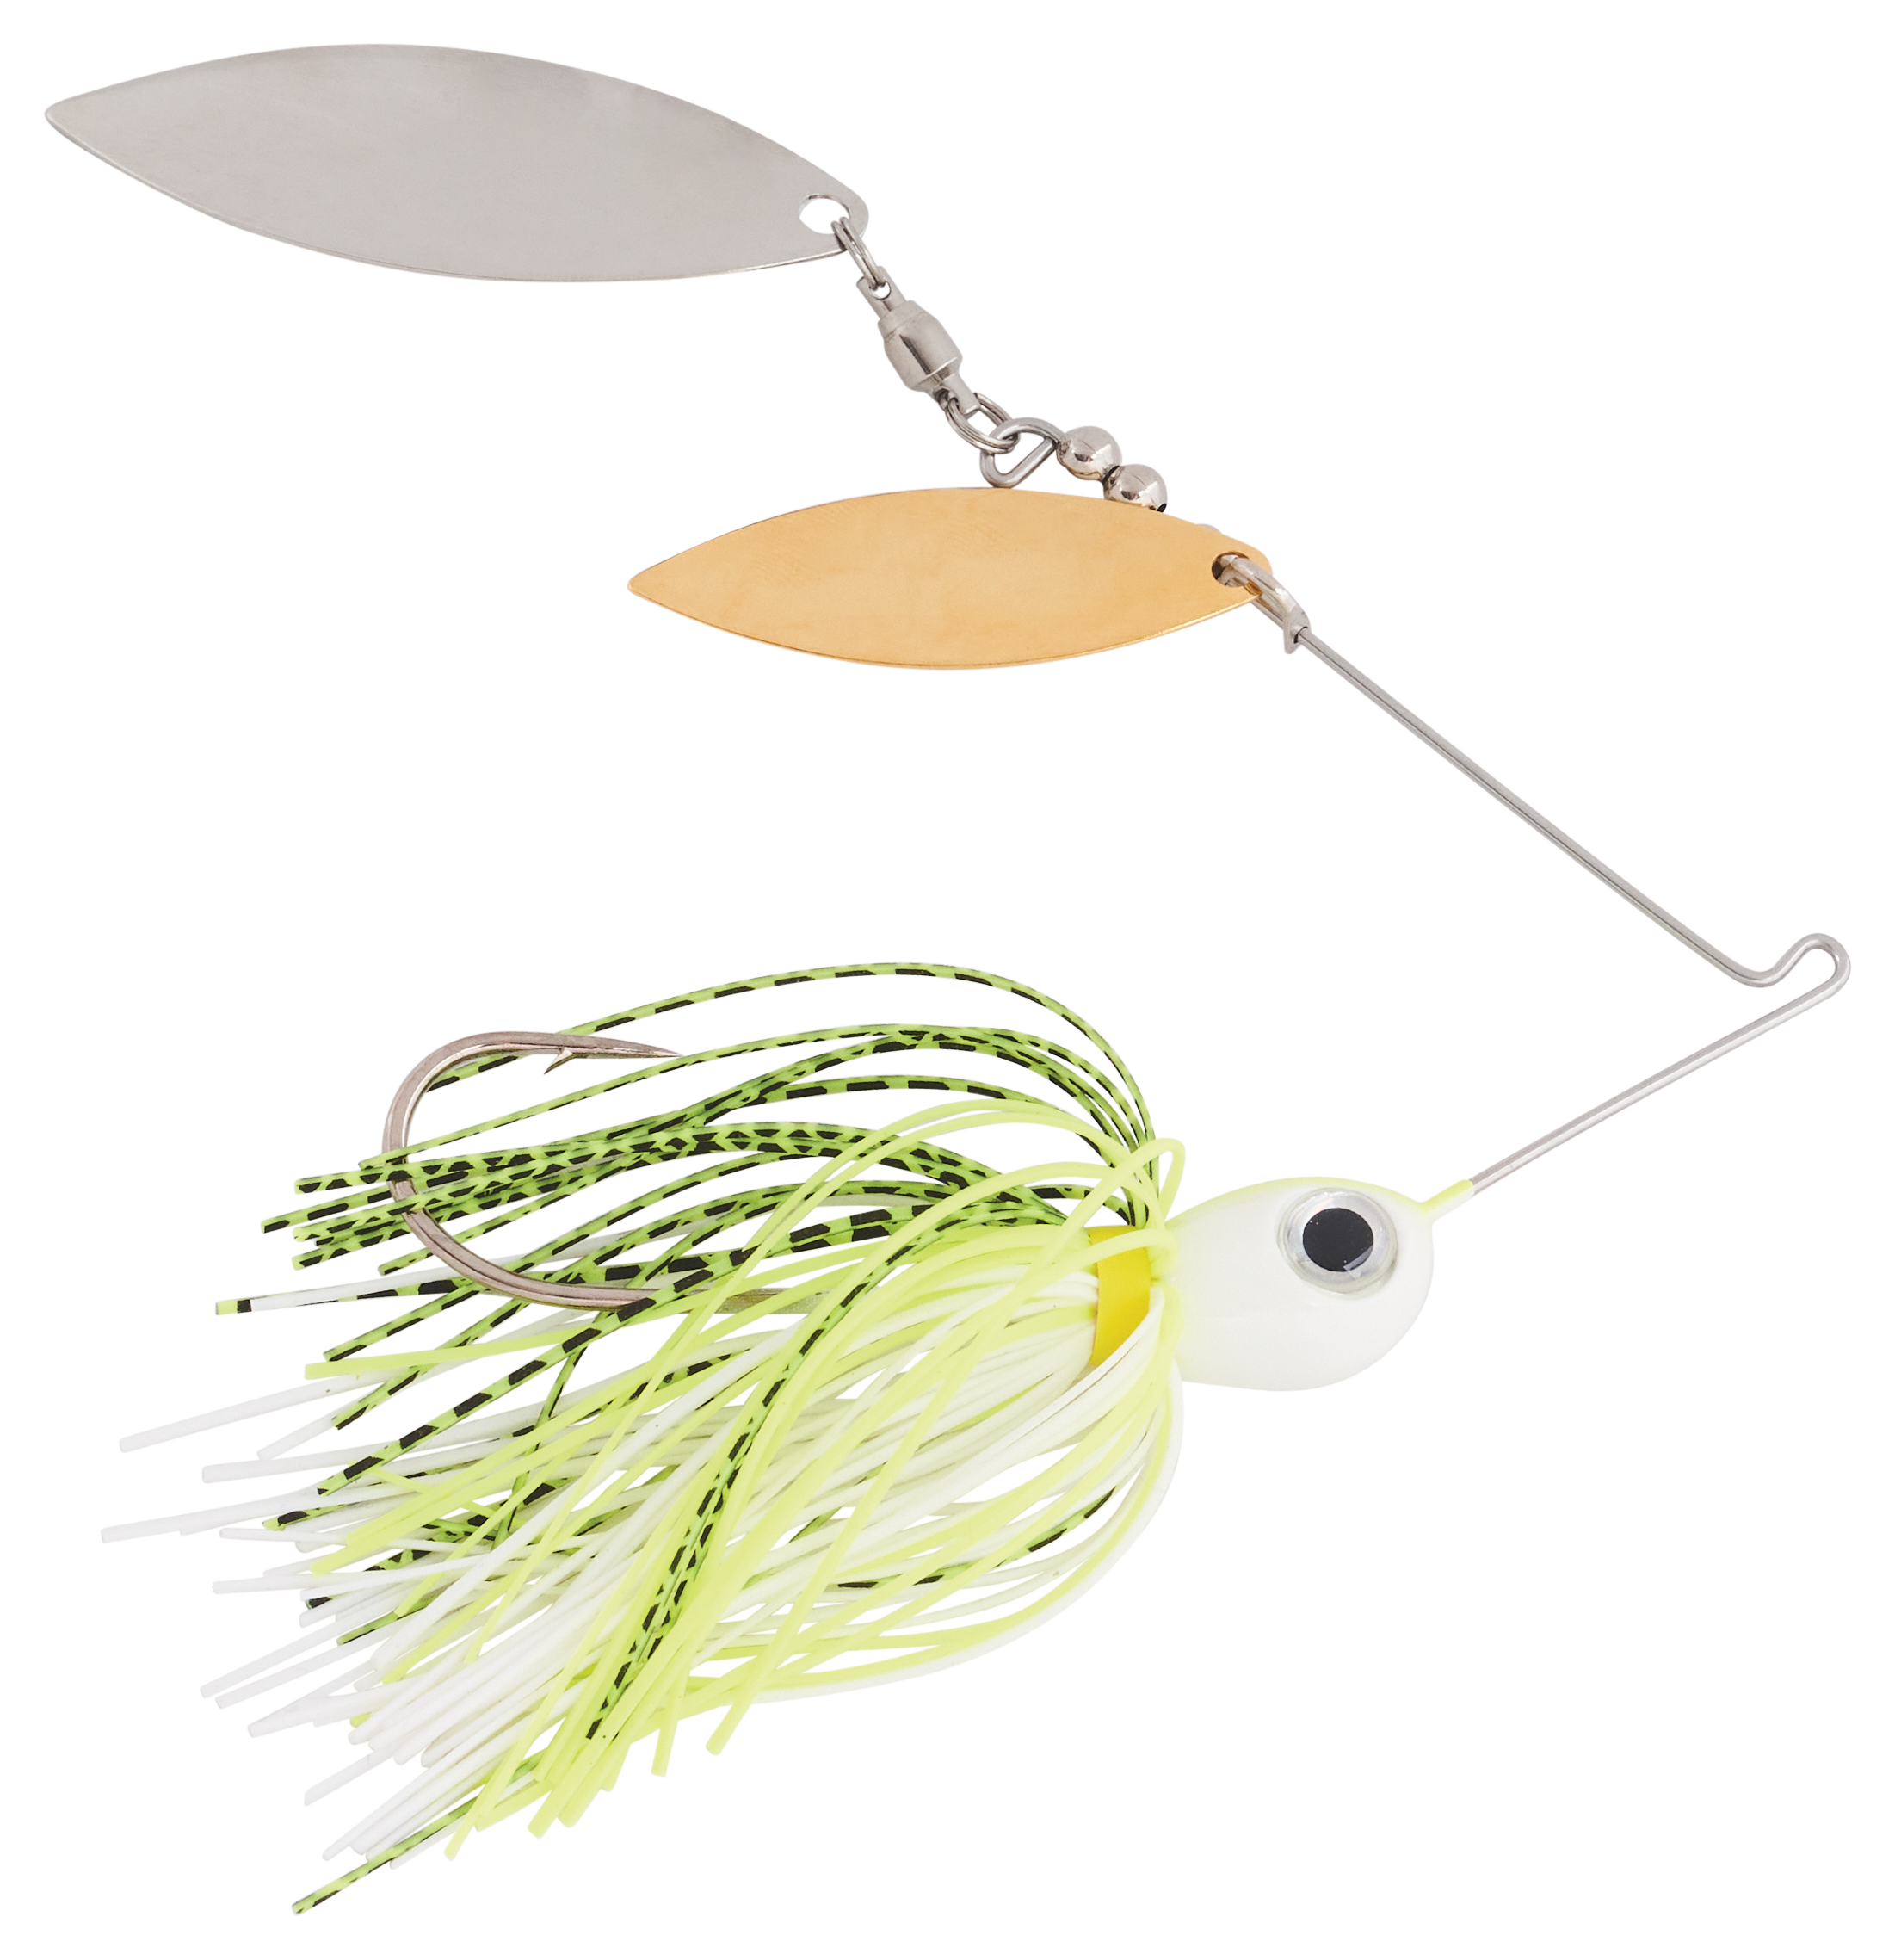 Spinnerbait 18g Spinners Spoon Jig Bait Double Willow Blade Needle Stinger  Hook Spoon Wire Bait Wobblers for Bass Fishing Lure